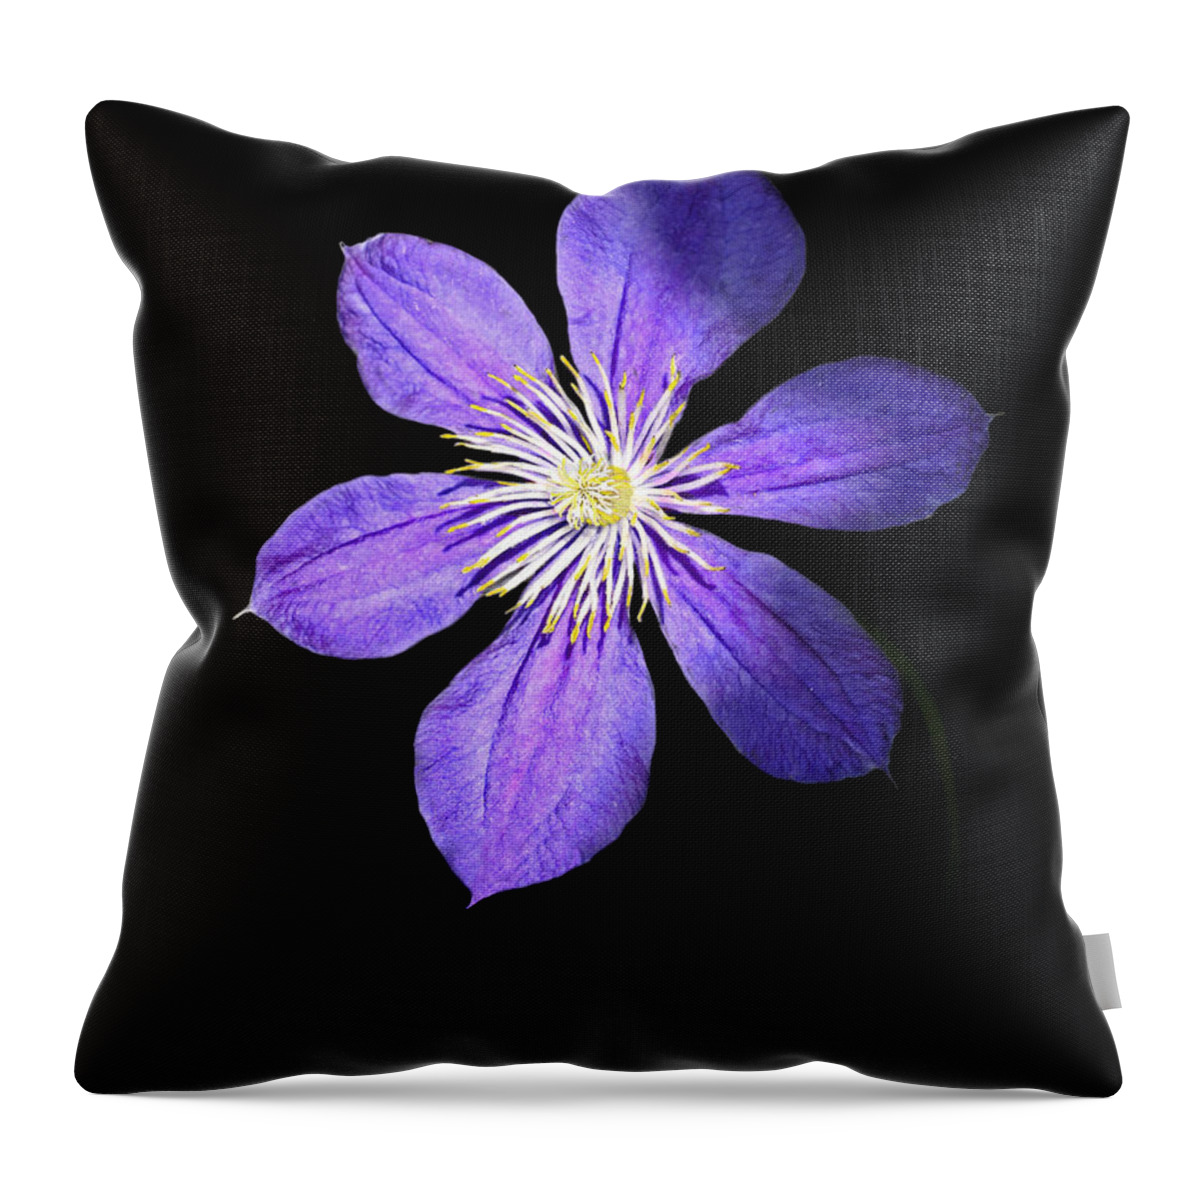 Blue Clematis Flower Throw Pillow featuring the photograph Show Time by Marina Kojukhova